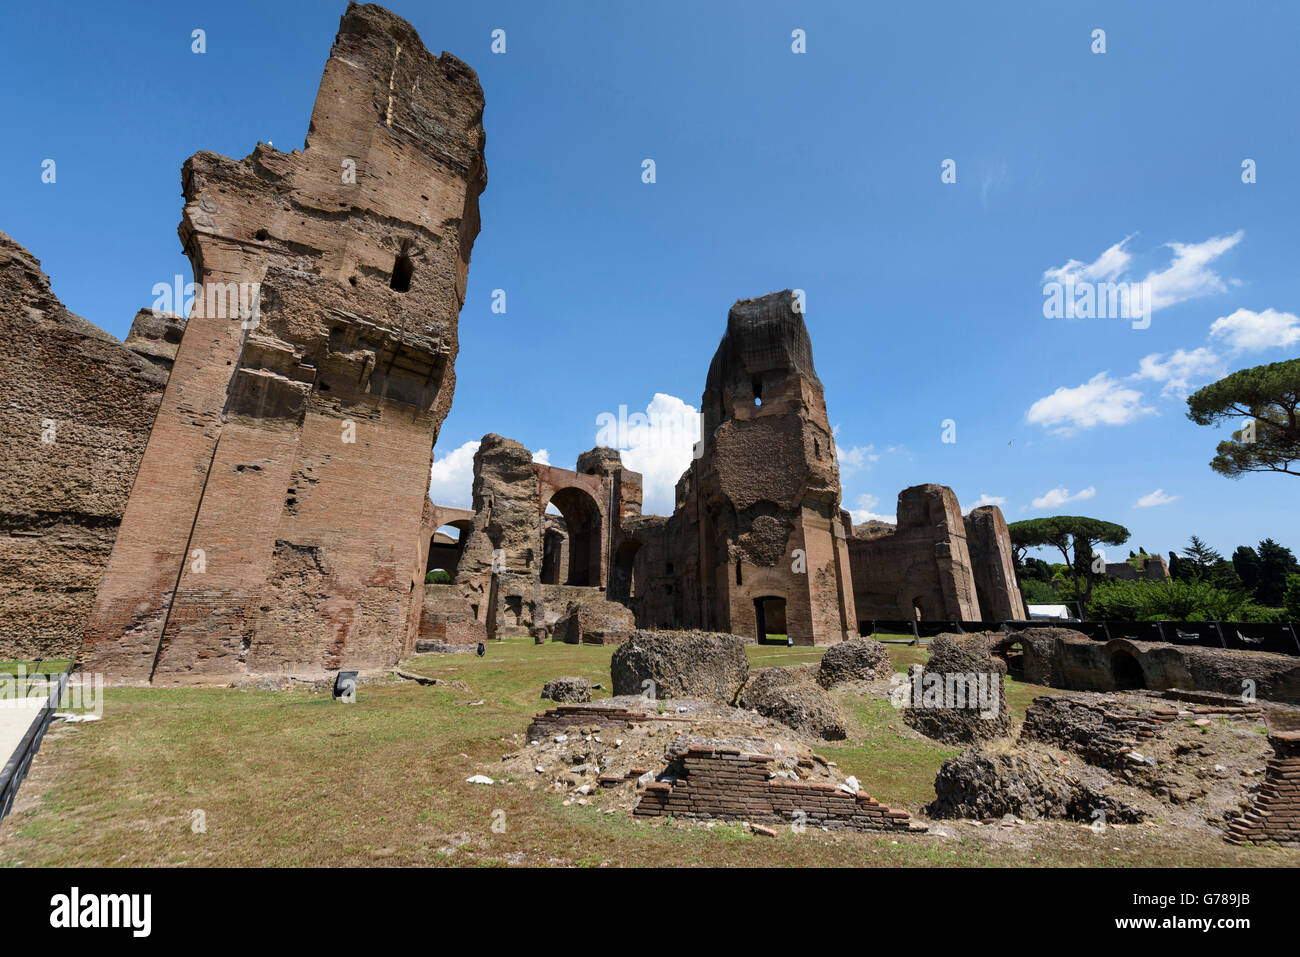 Ancient ruins of the Roman baths of Caracalla, Rome, Italy. Stock Photo